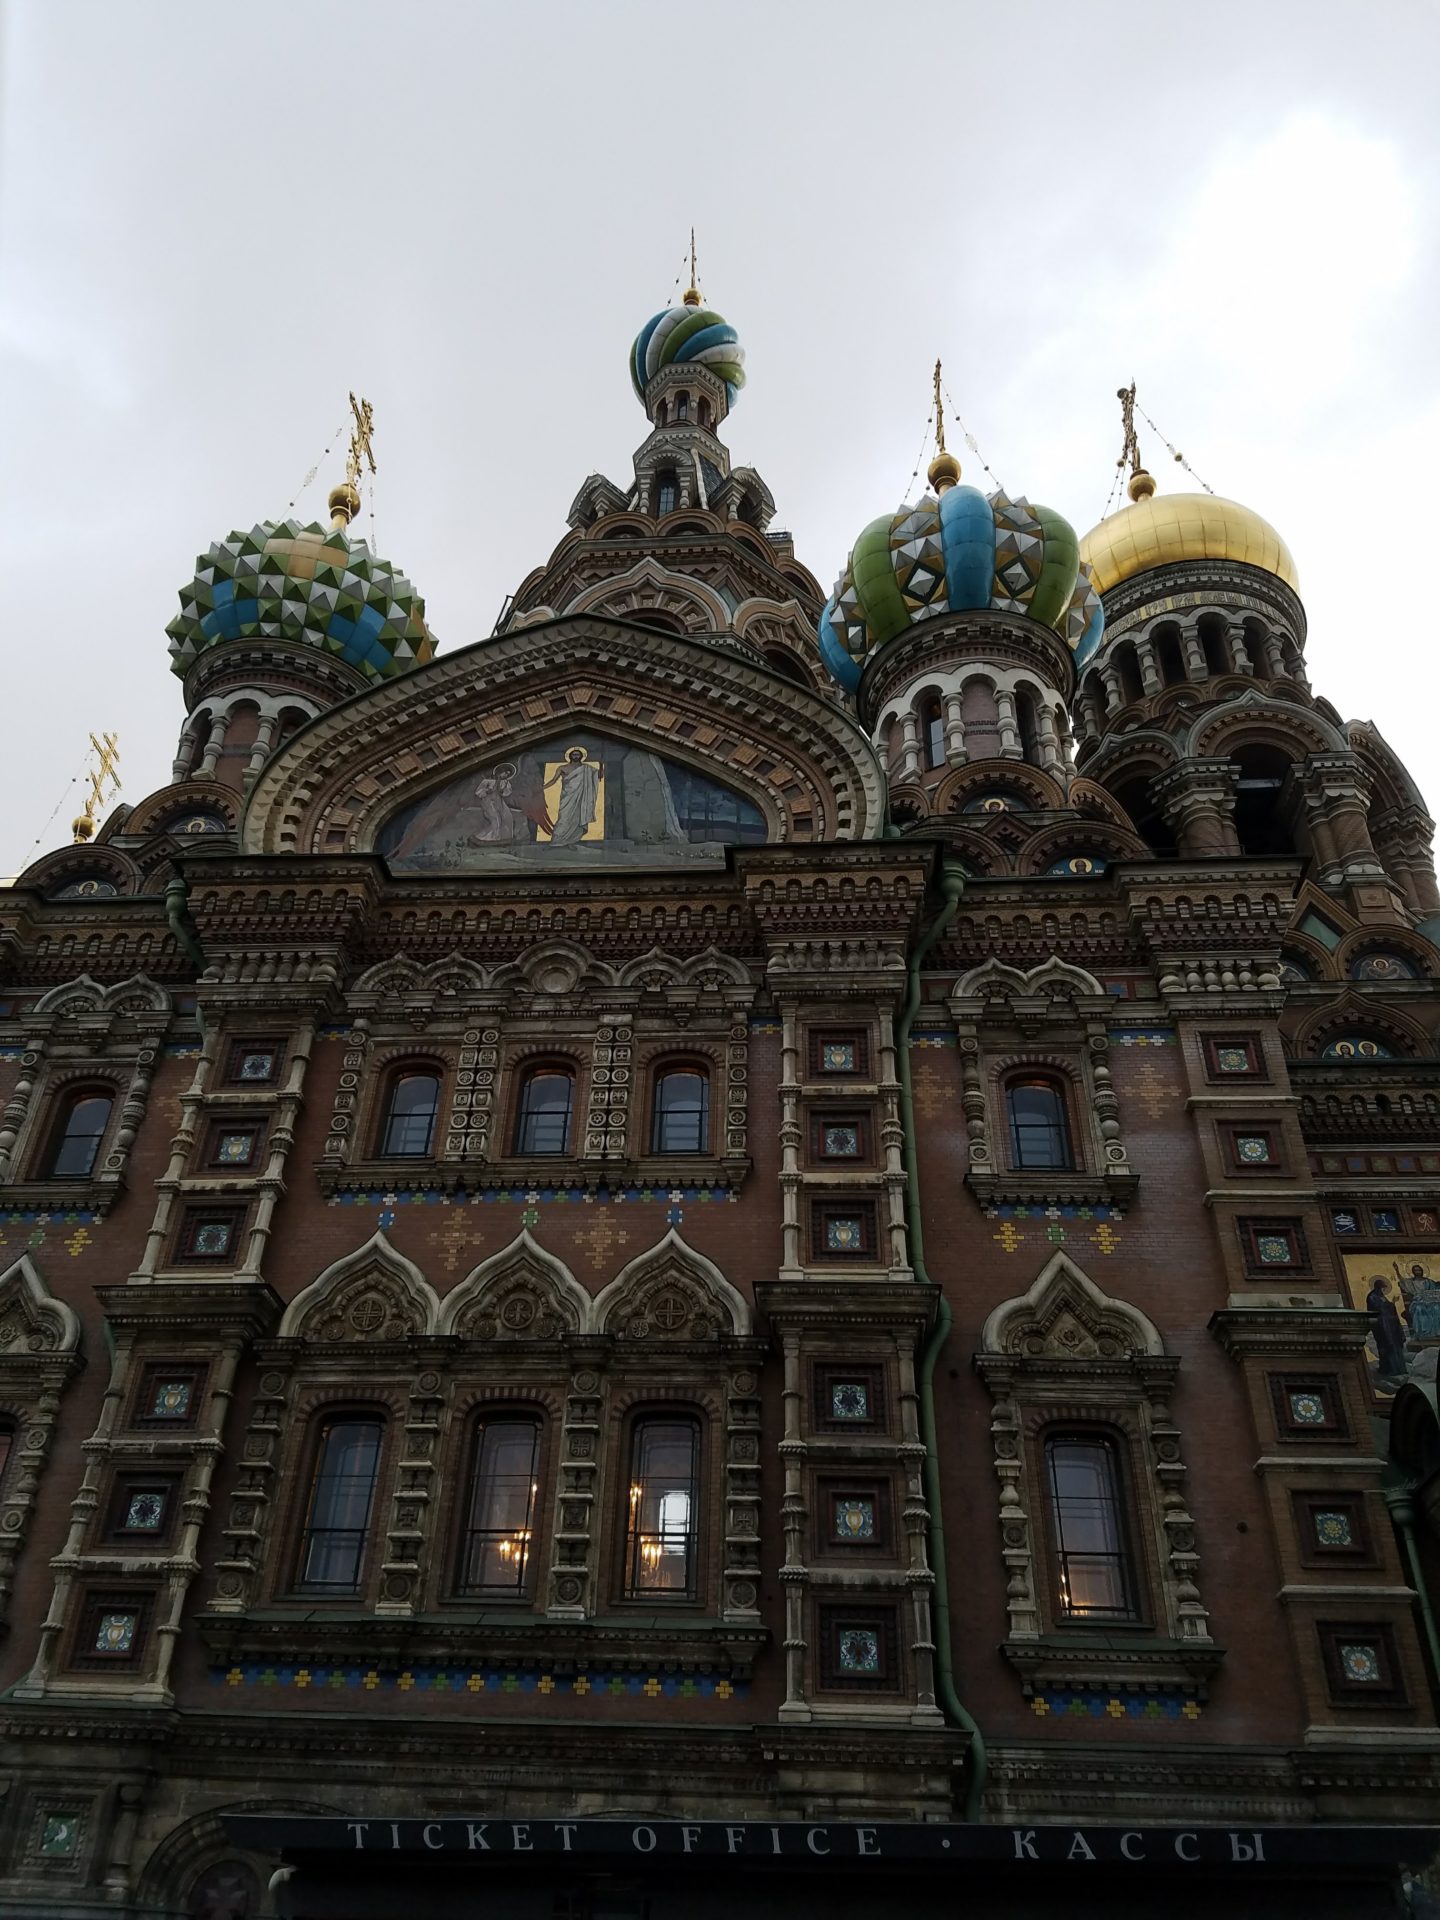 Church of the Savior on Blood with many domes